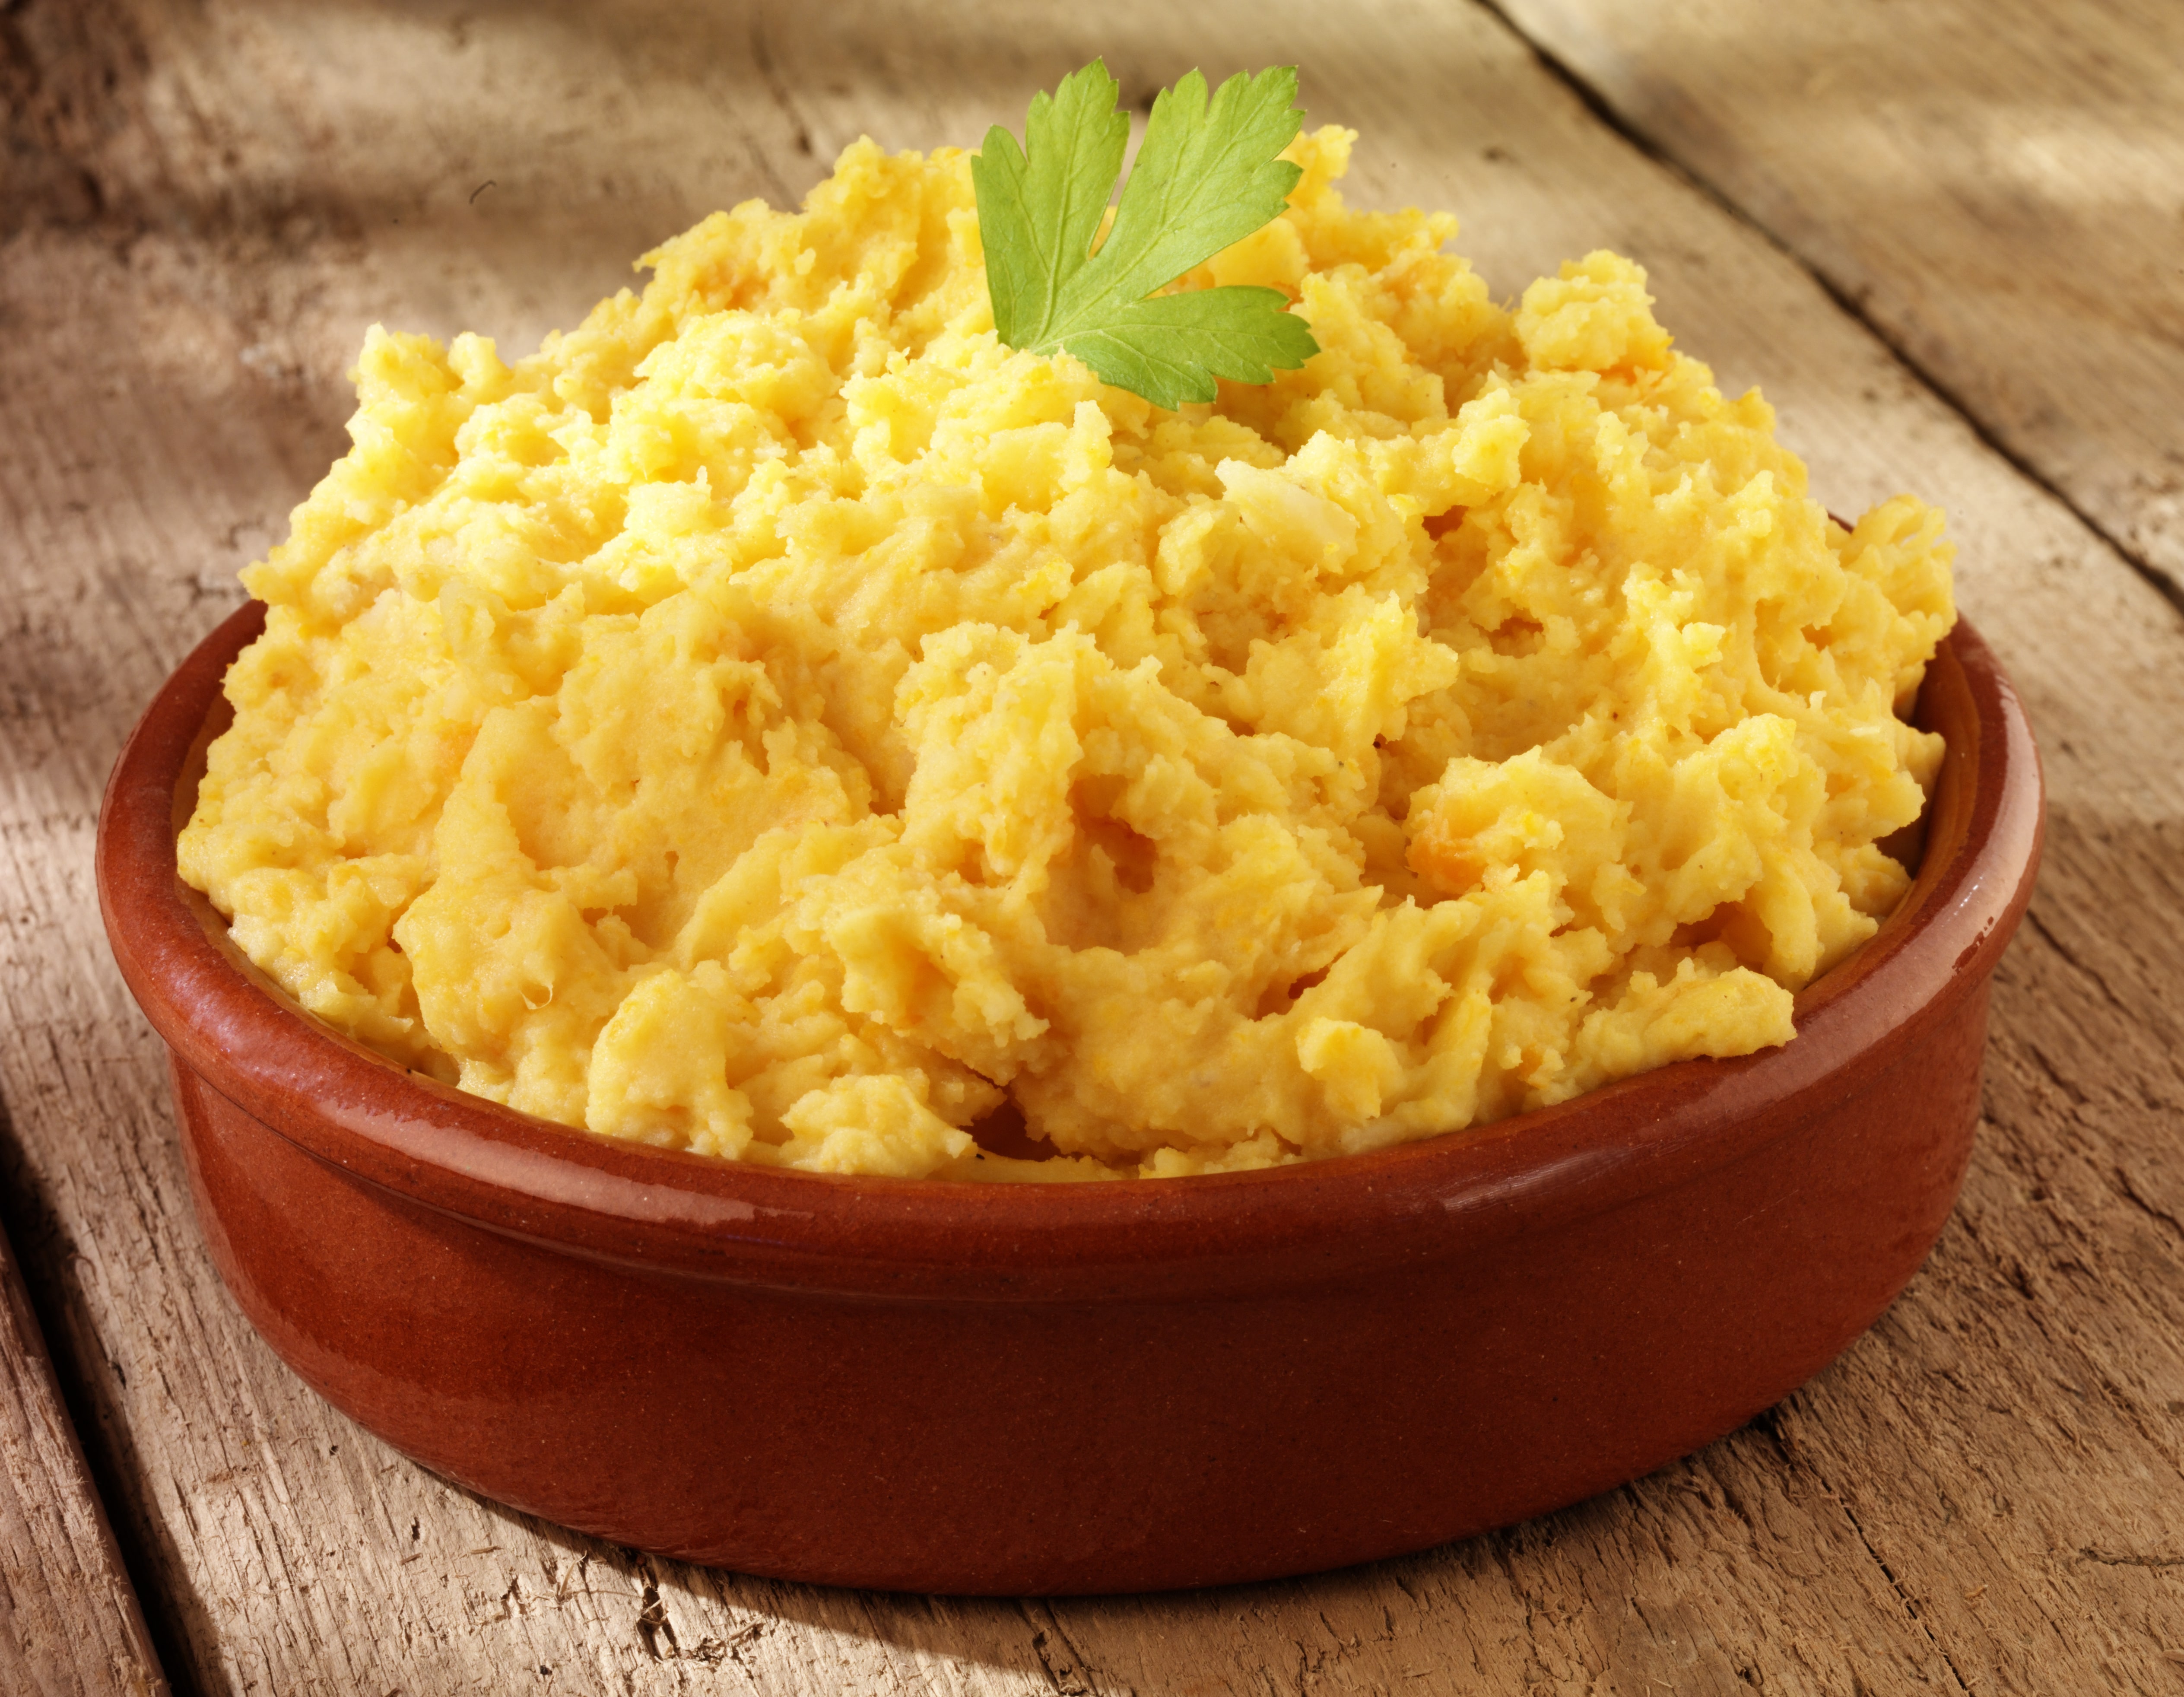 CARROT AND SWEDE MASH